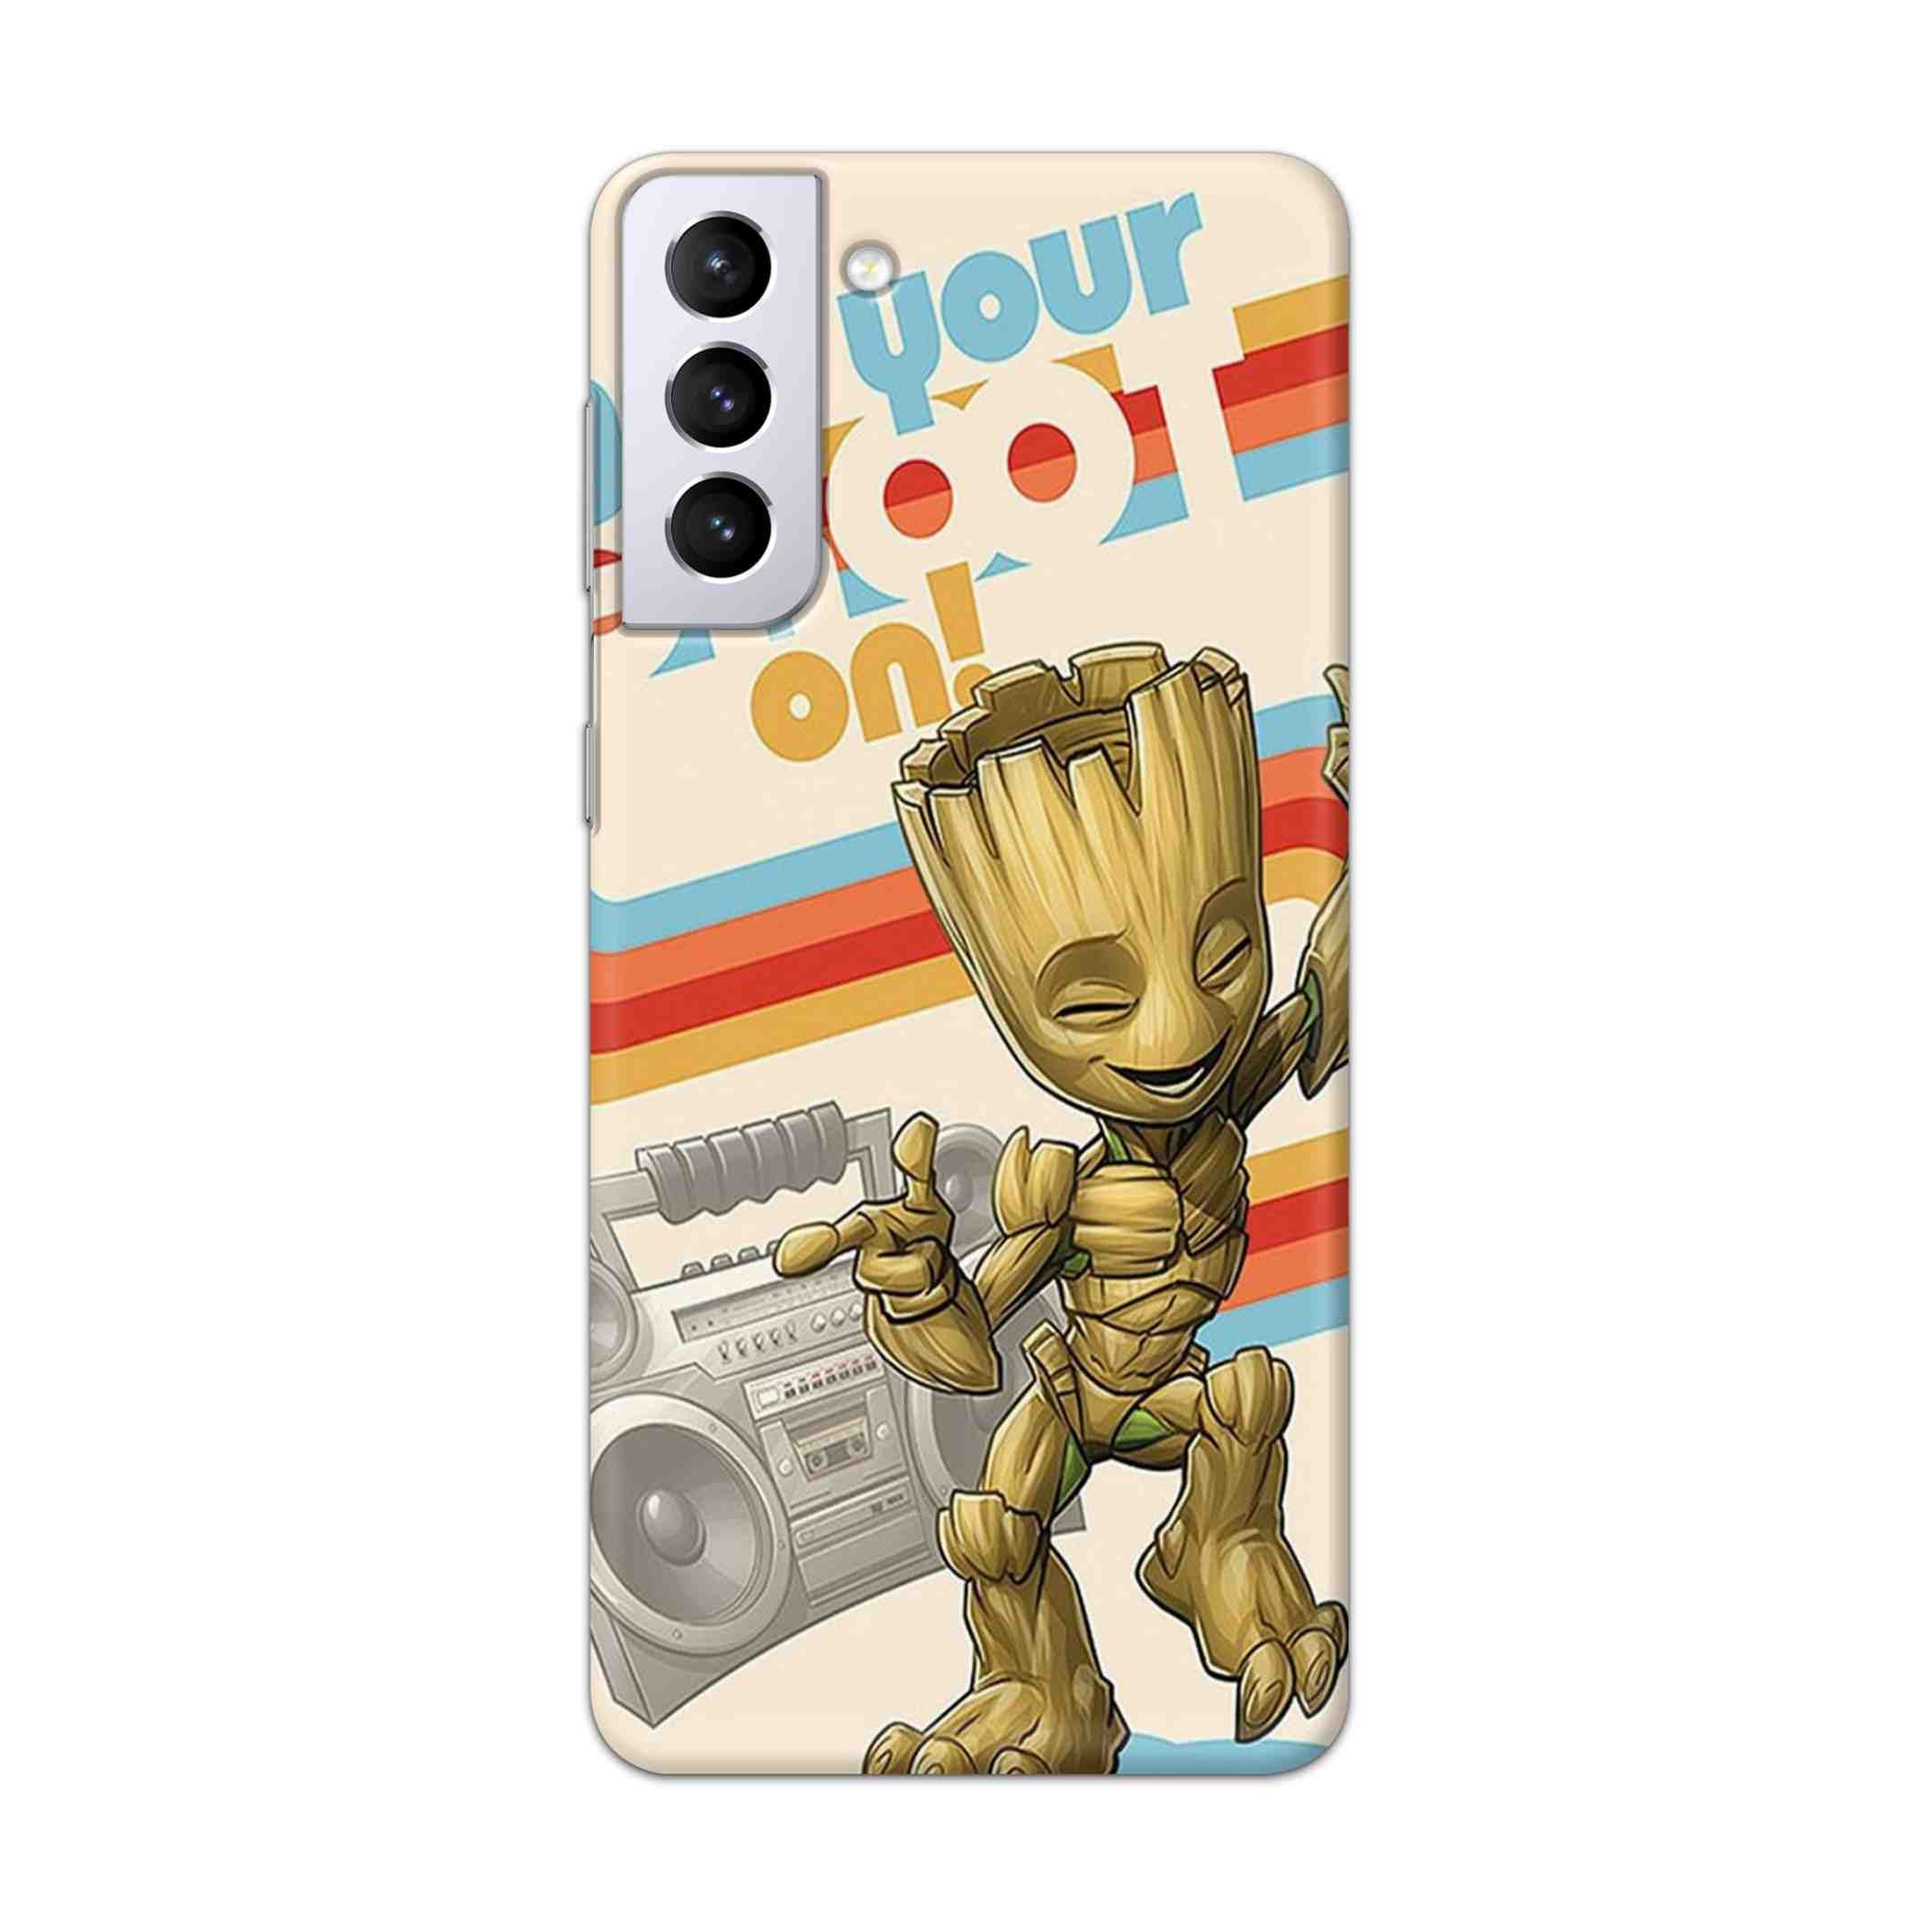 Buy Groot Hard Back Mobile Phone Case Cover For Samsung Galaxy S21 Plus Online